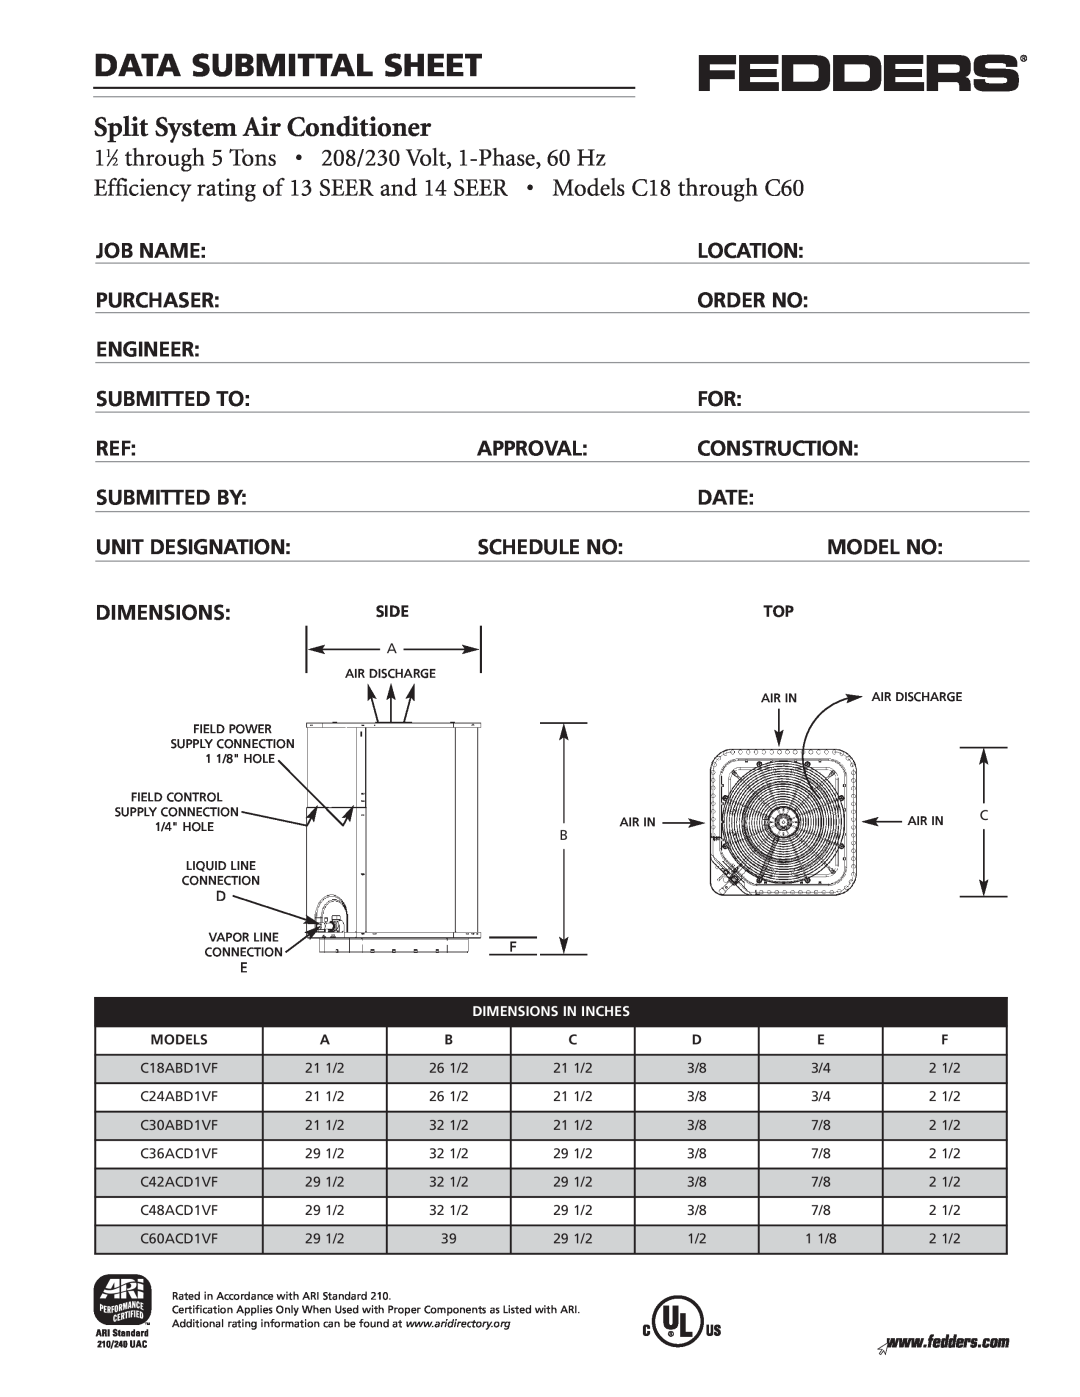 Fedders C18, C60 dimensions Data Submittal Sheet, Split System Air Conditioner, 11⁄2 through 5 Tons 